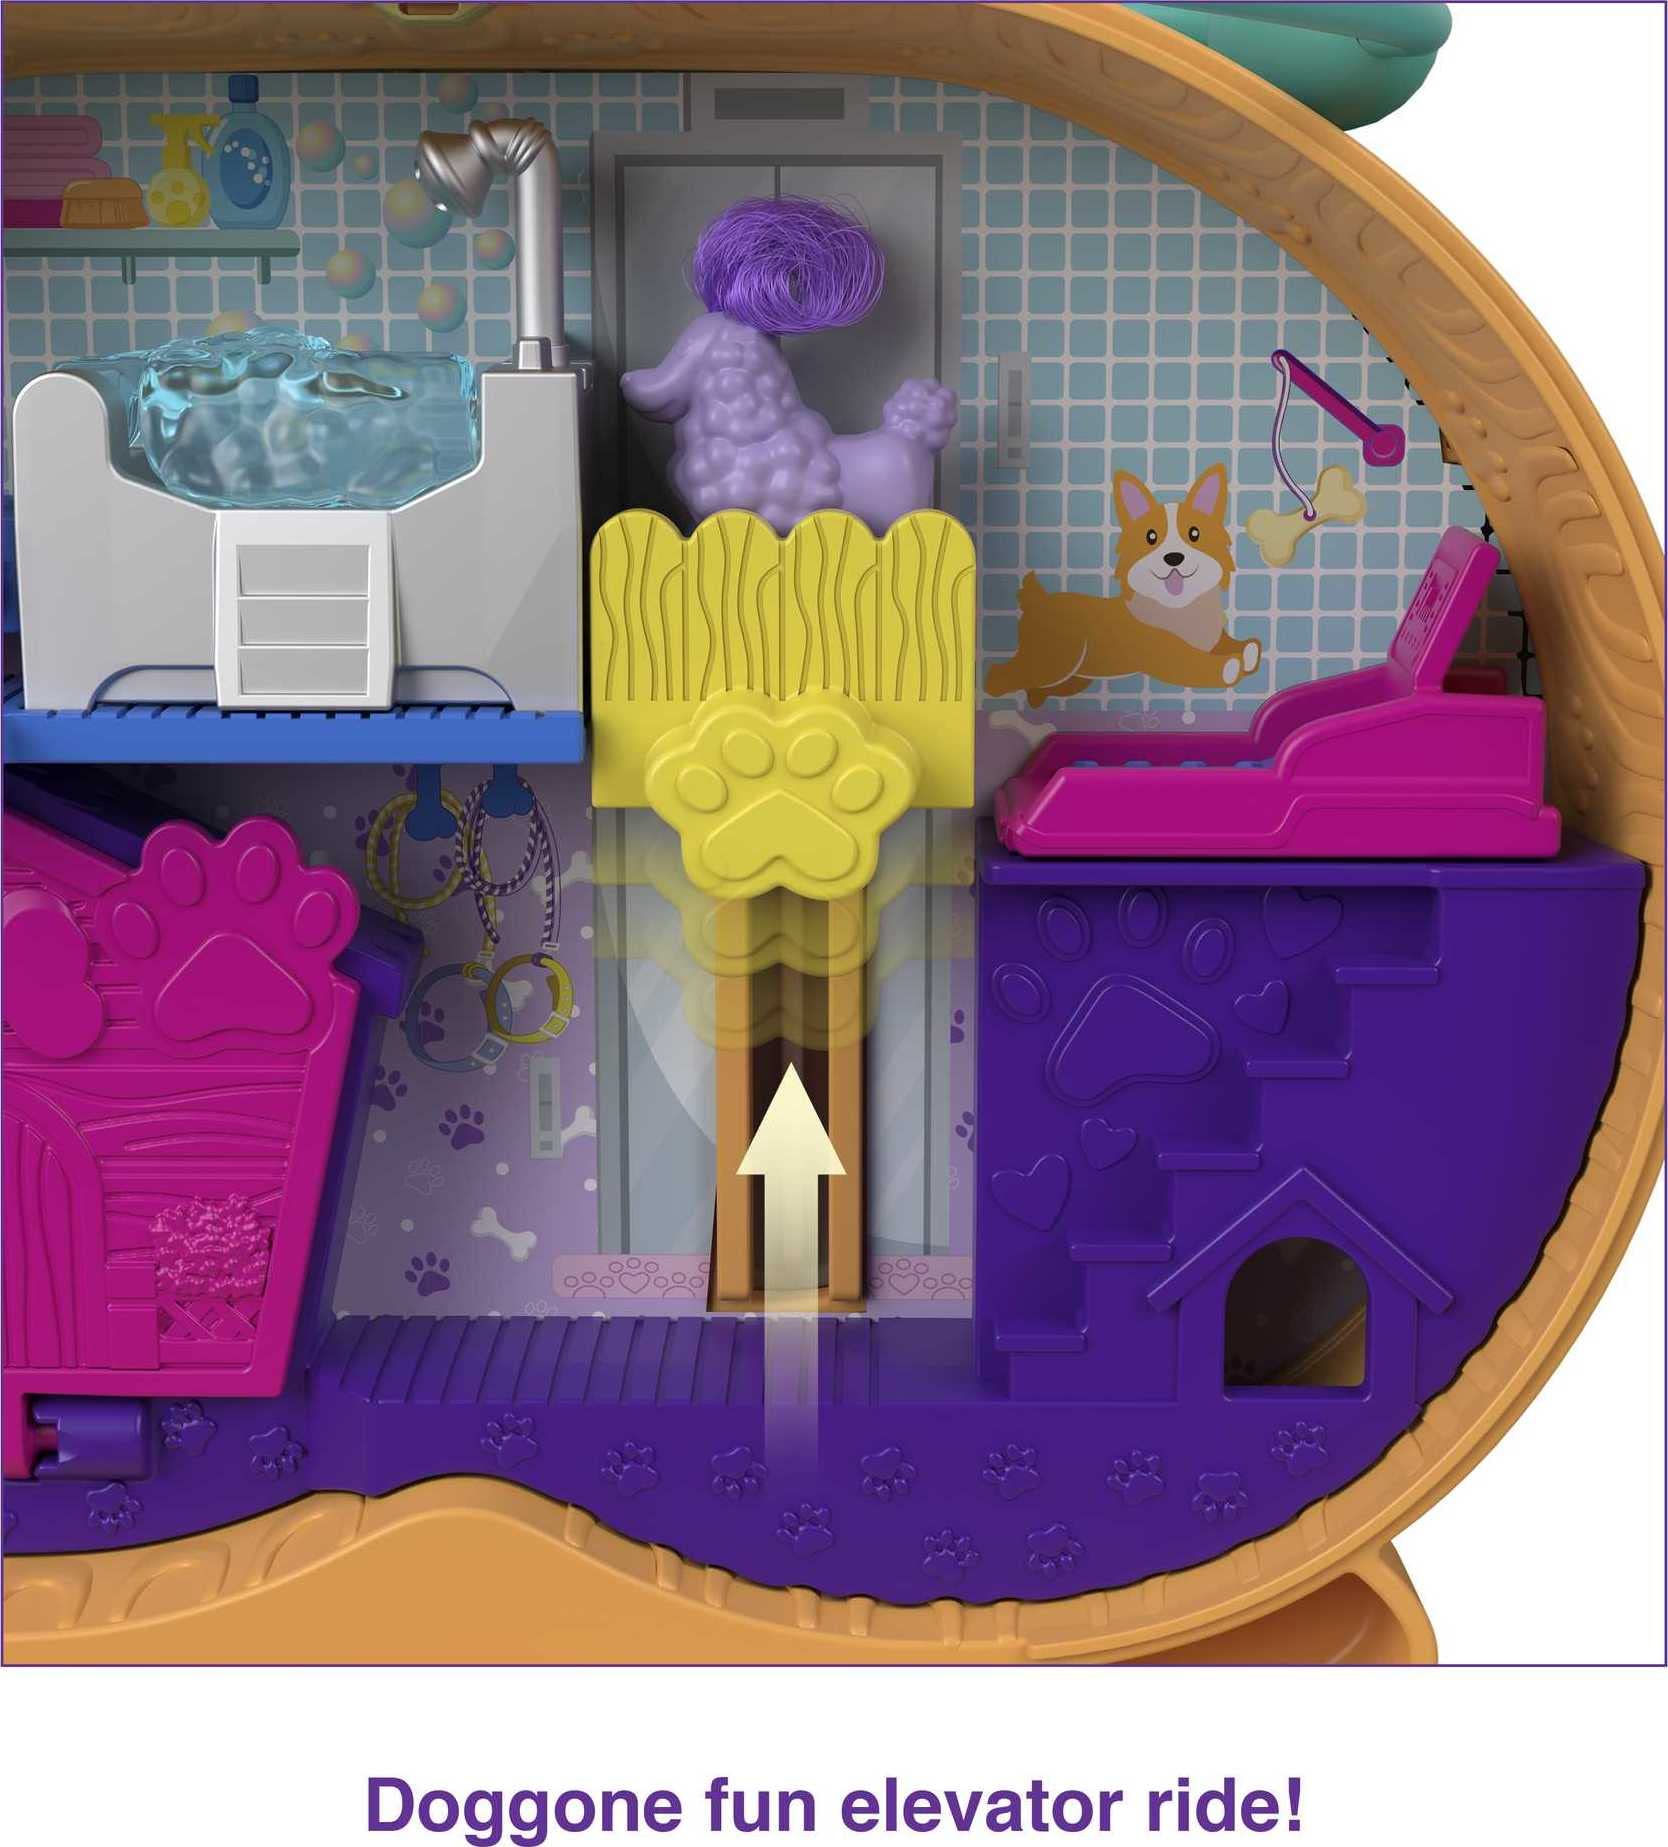 Polly Pocket Compact Playset, Corgi Cuddles with 2 Micro Dolls & Accessories, Travel Toys with Surprise Reveals (Amazon Exclusive)